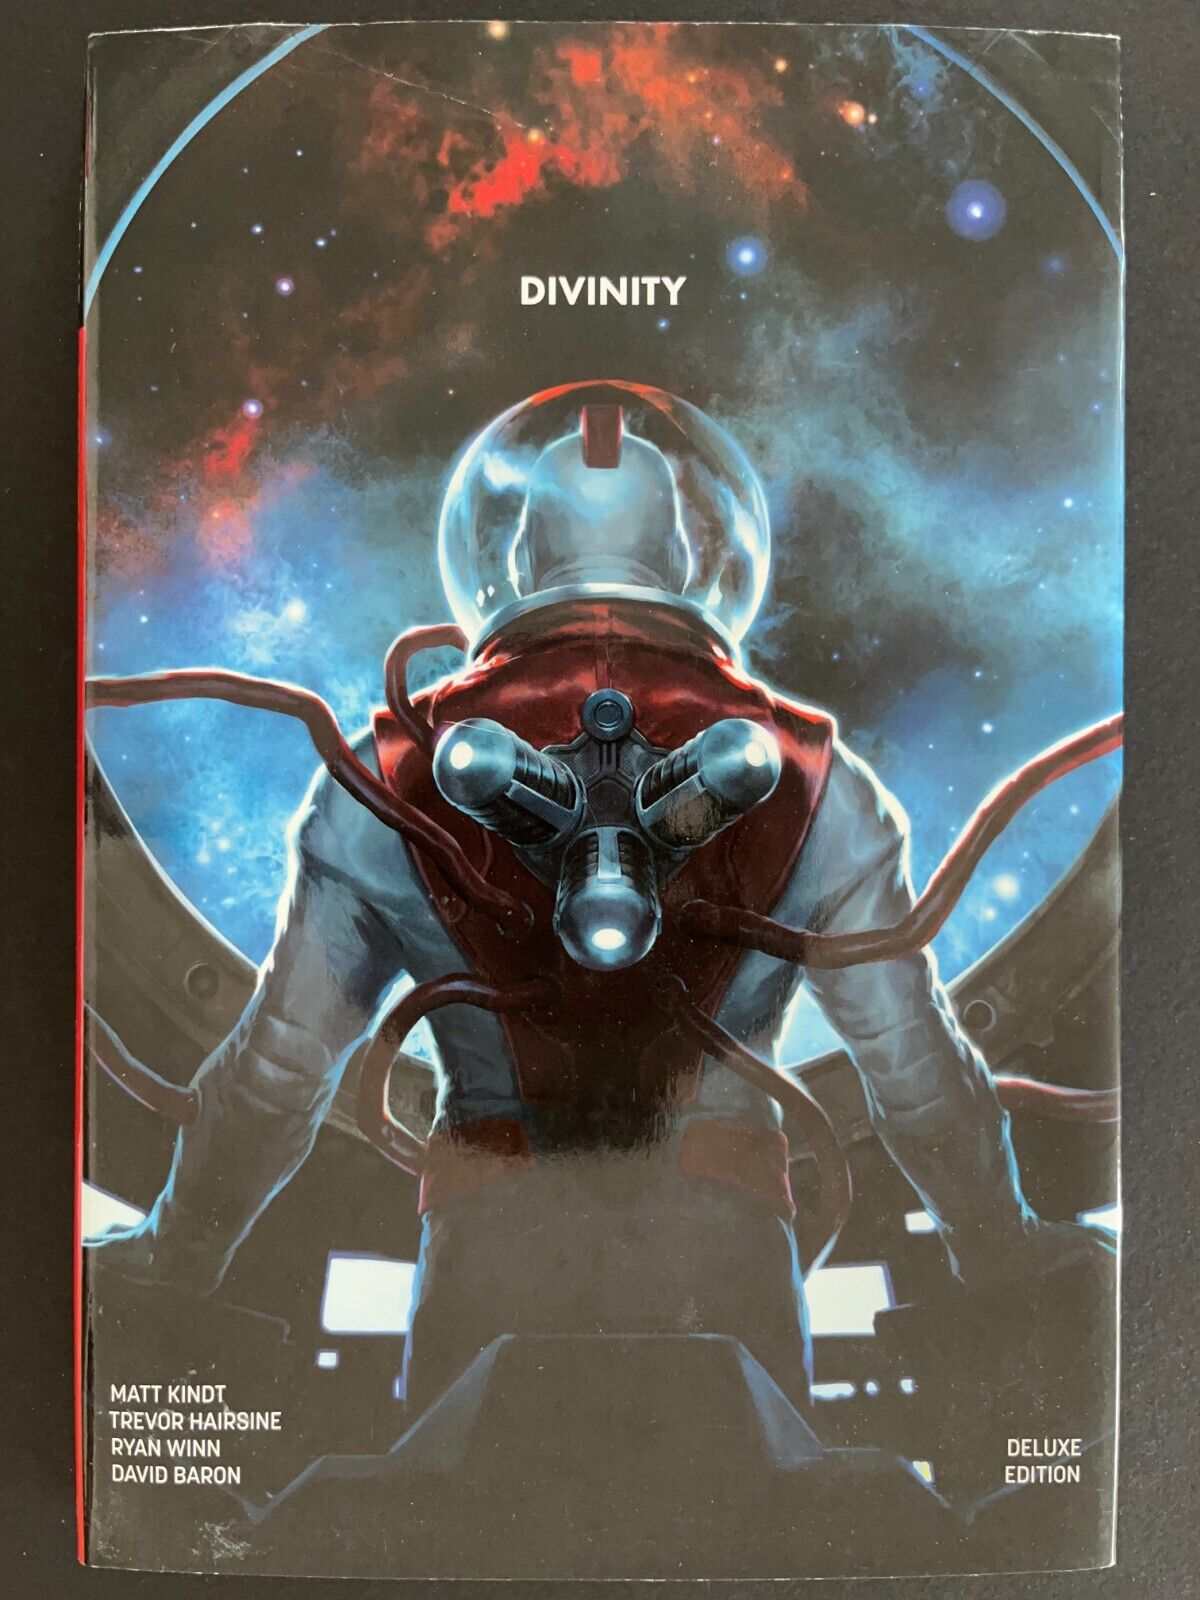 Divinity: Deluxe Edition (Valiant, 2015, Graphic Novel, Hardcover)